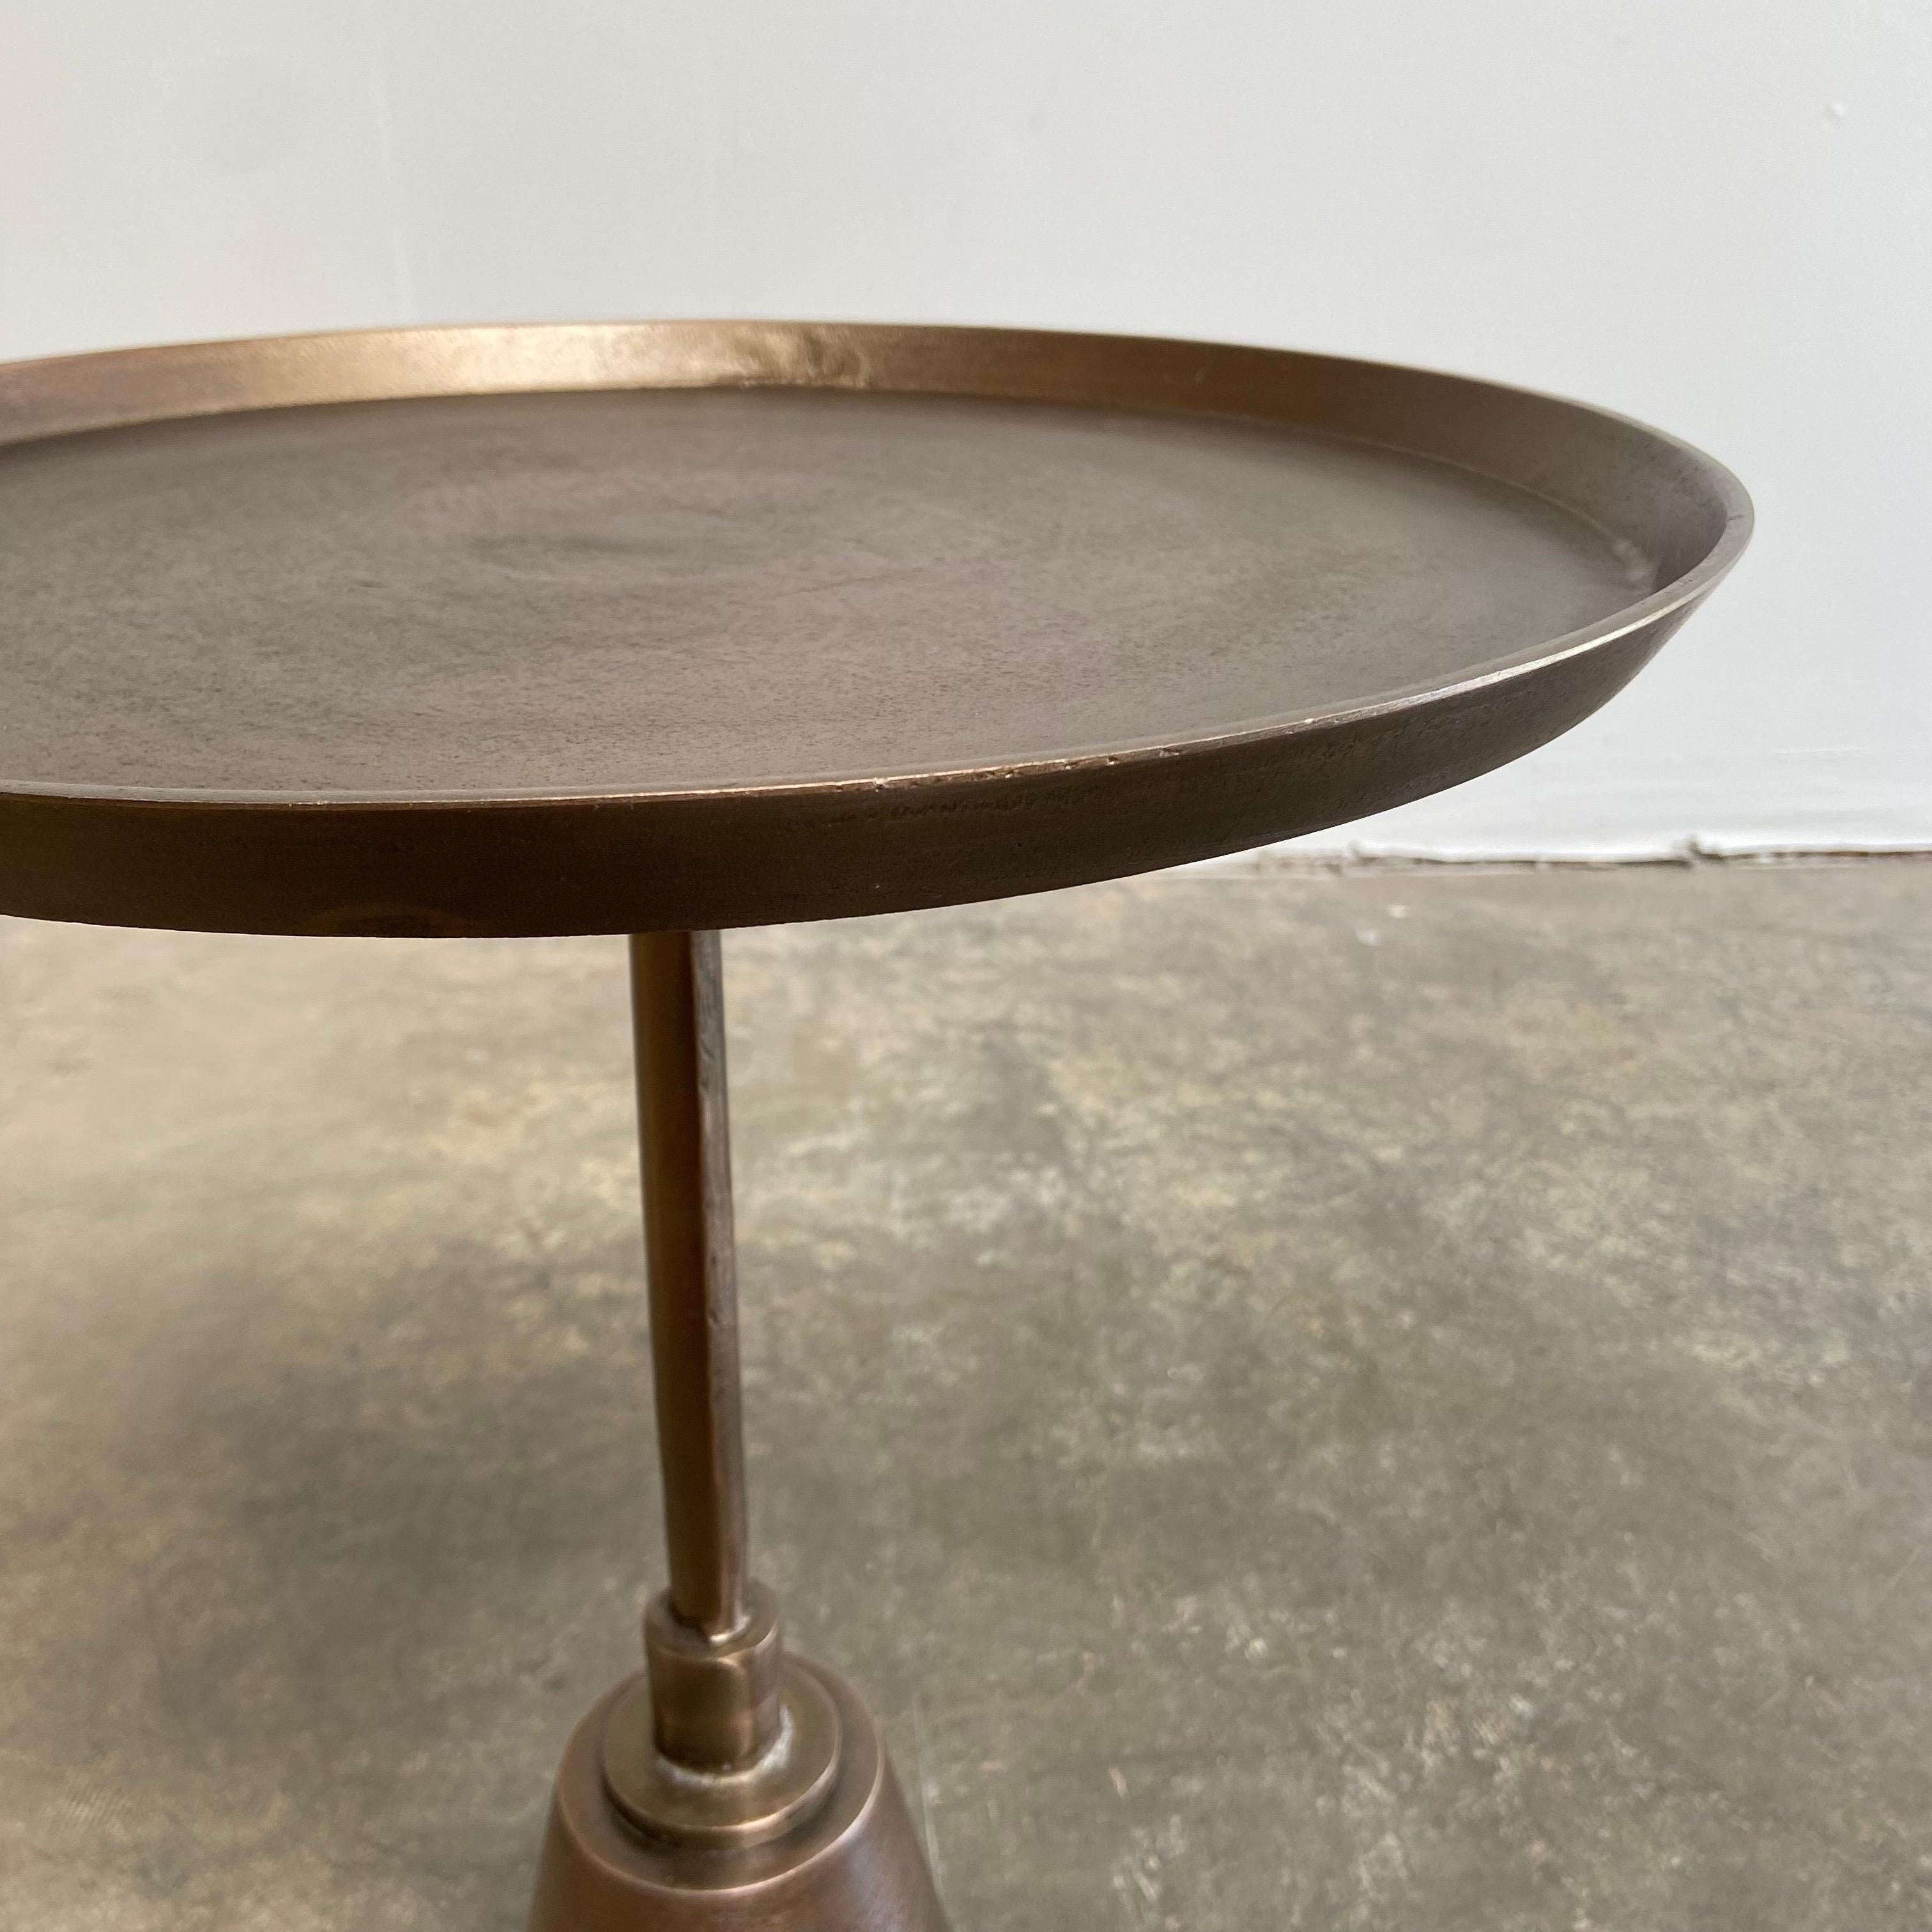 Modern Style Side Table in an Antique Brass Colored Finish 3